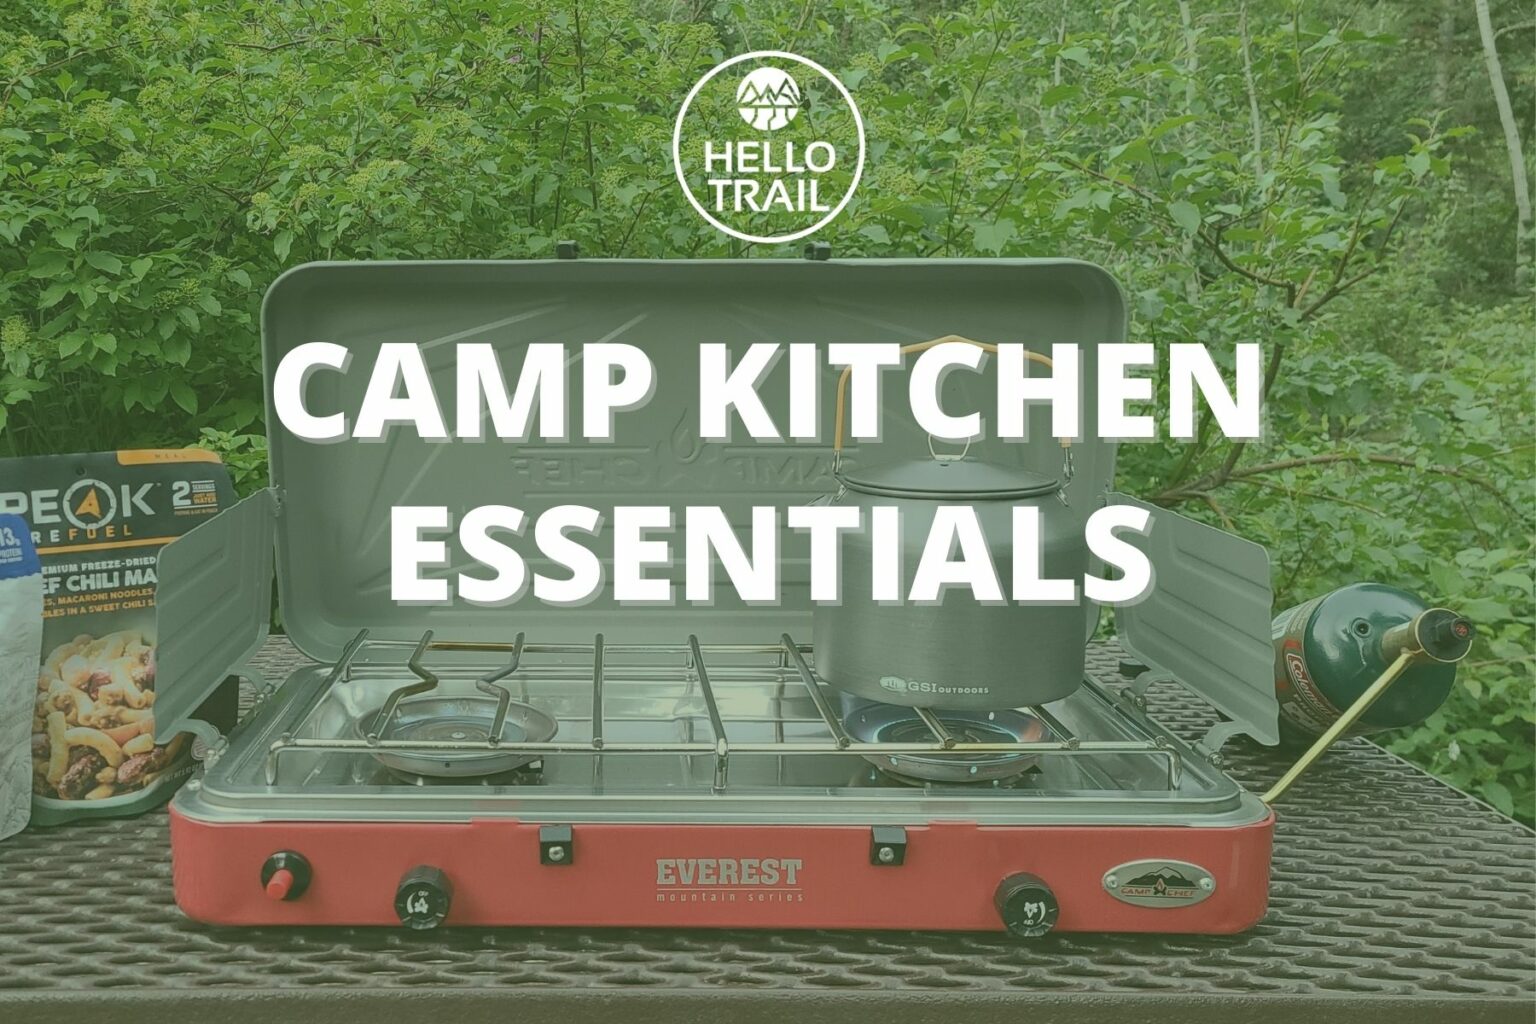 Camping Kitchen - HelloTrail.com